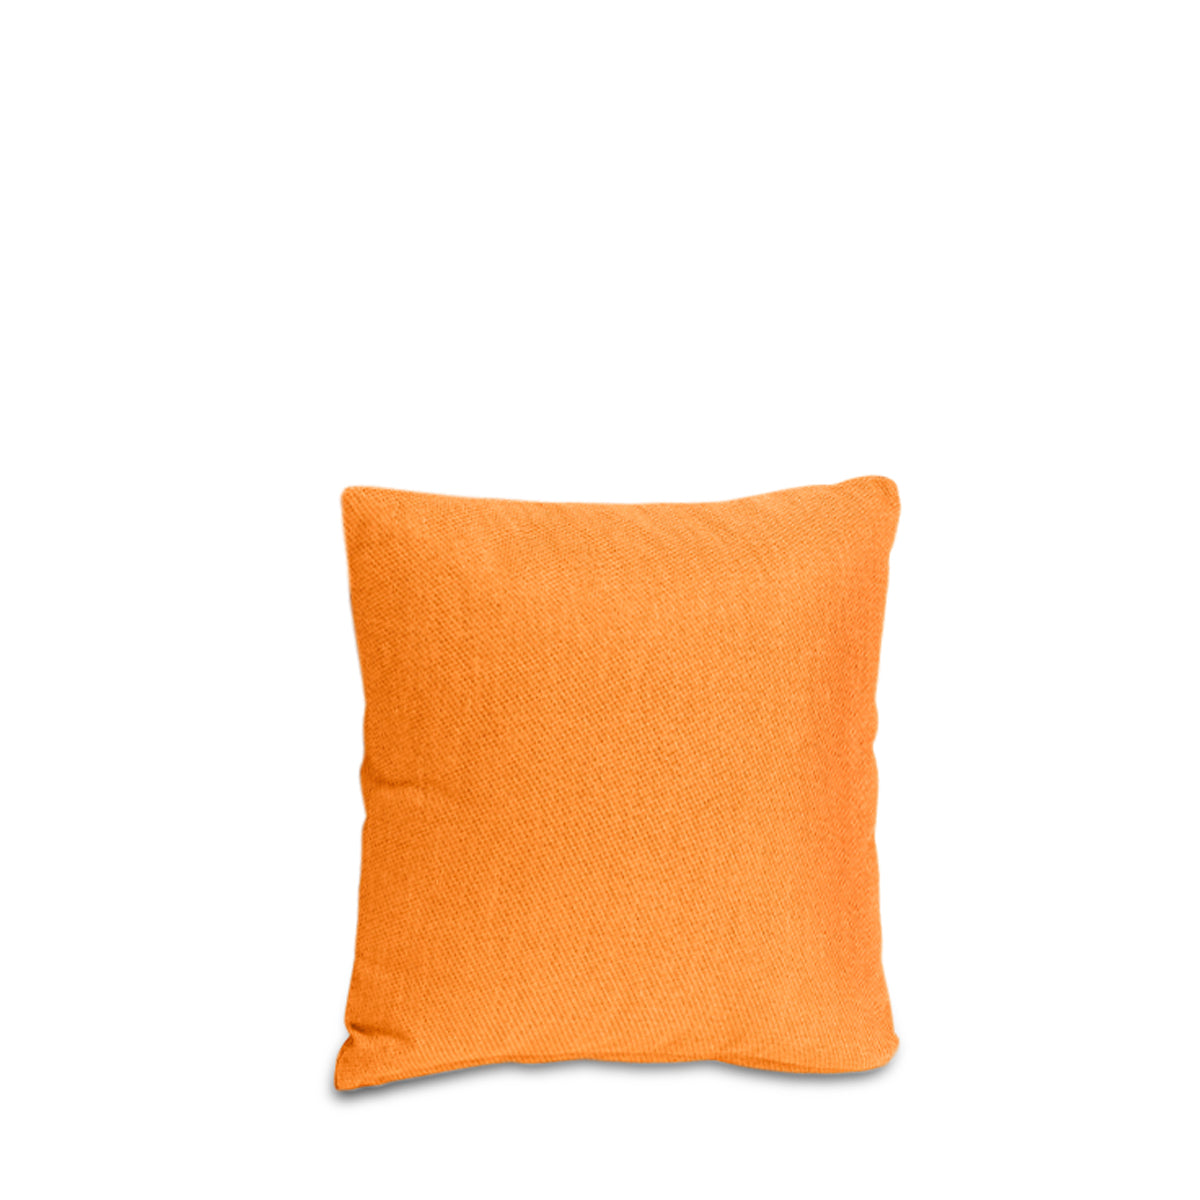 that's living outdoor small decorative outdoor pillows orange outdoor cushions 